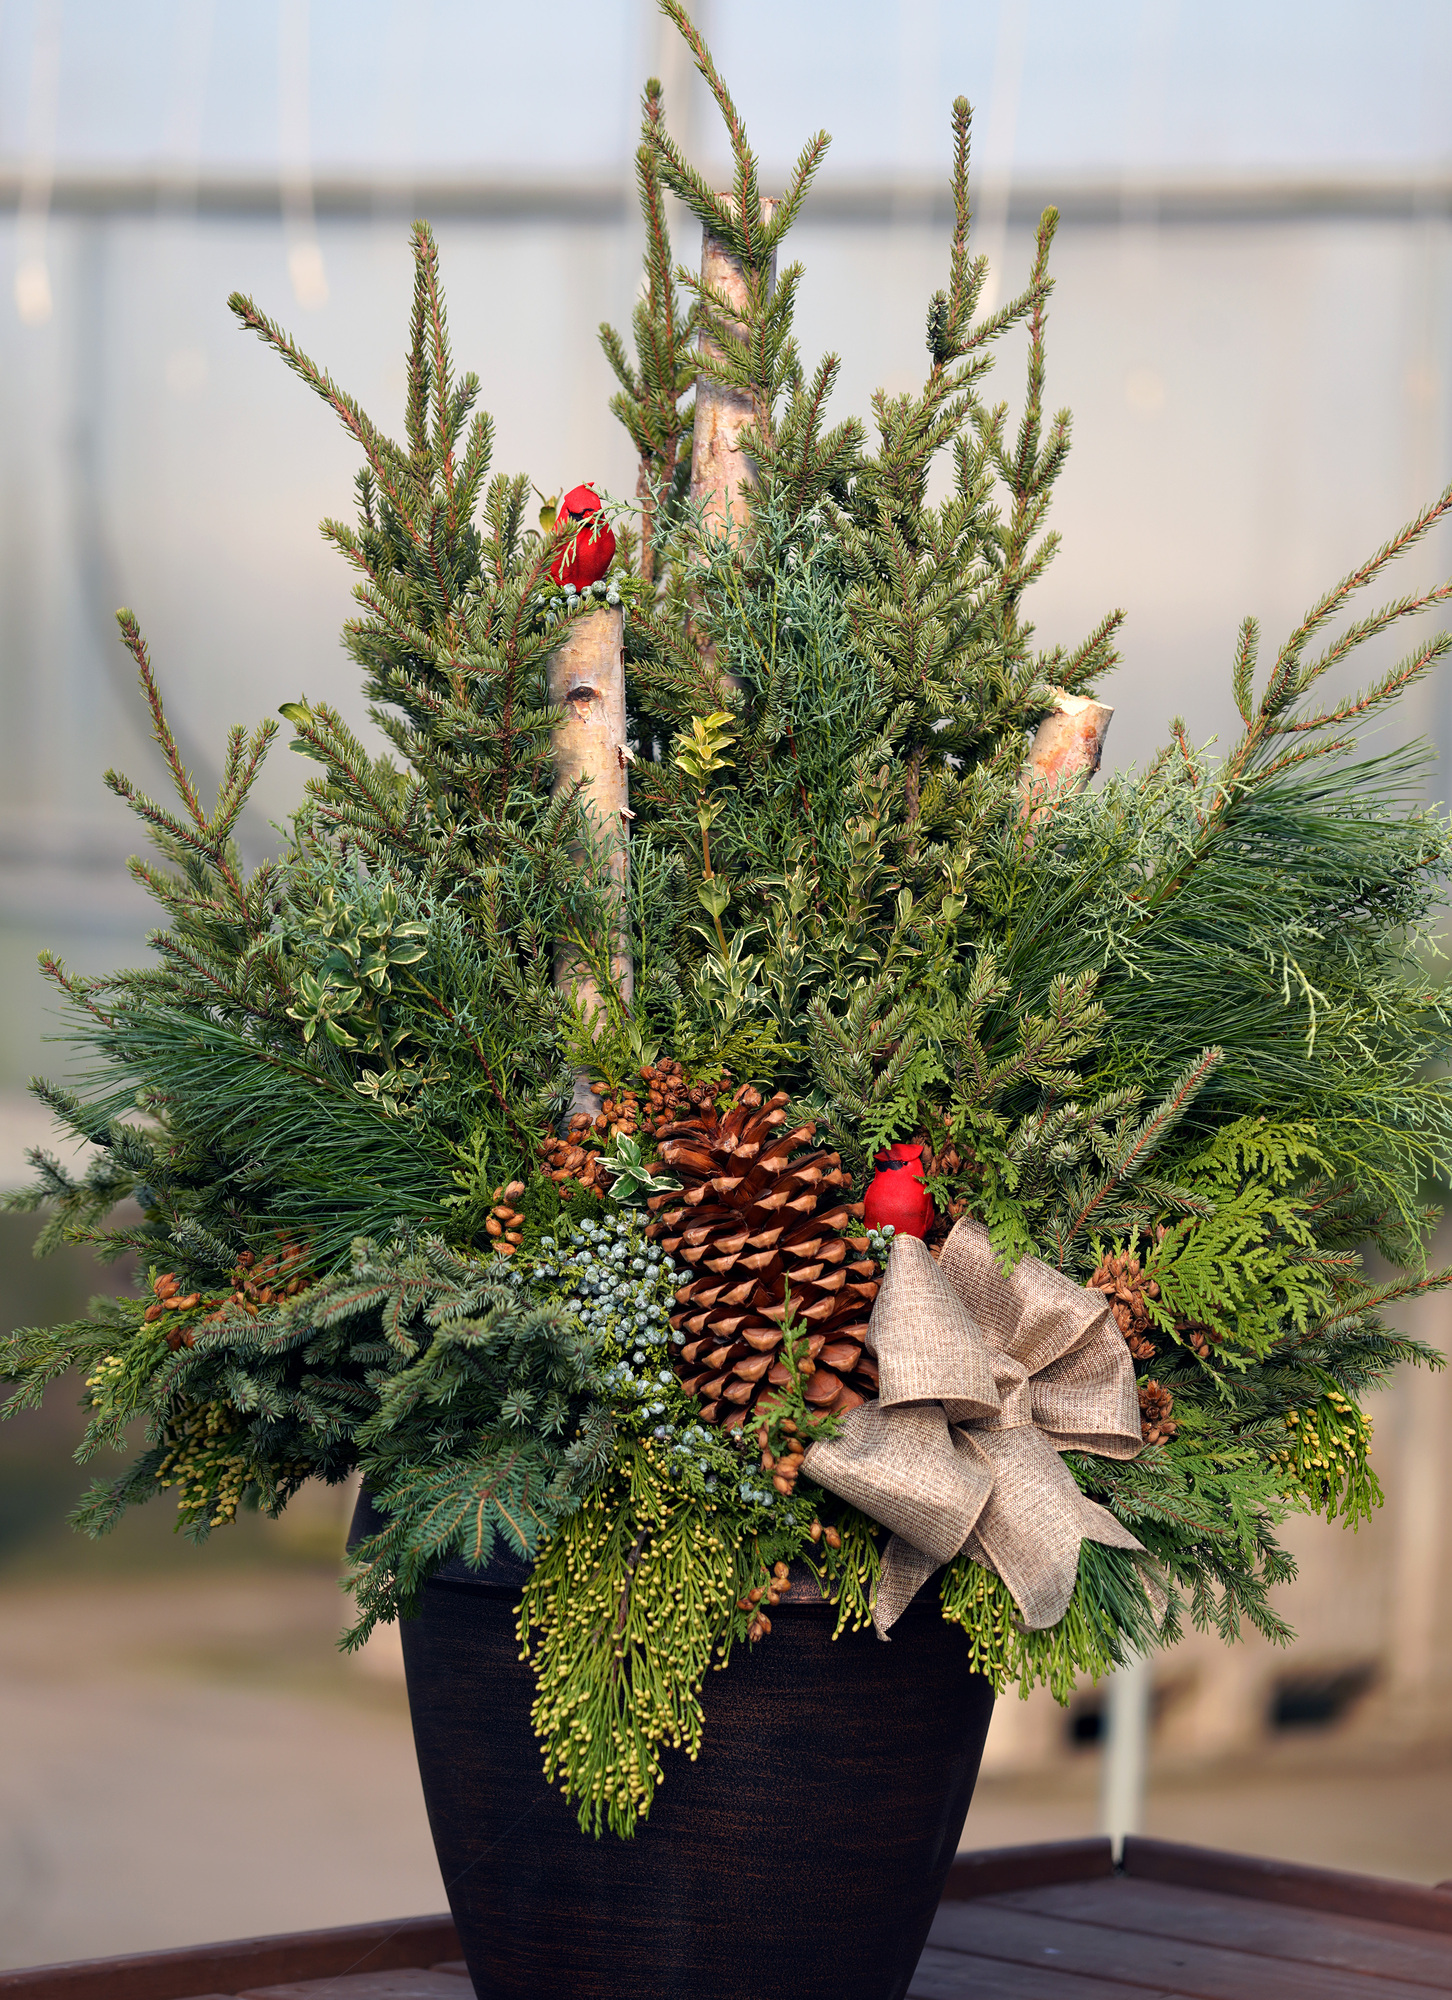 Custom holiday planter designed by Pahls designer Beth Rau. Ideas for creative winter and holiday spruce tip planters.